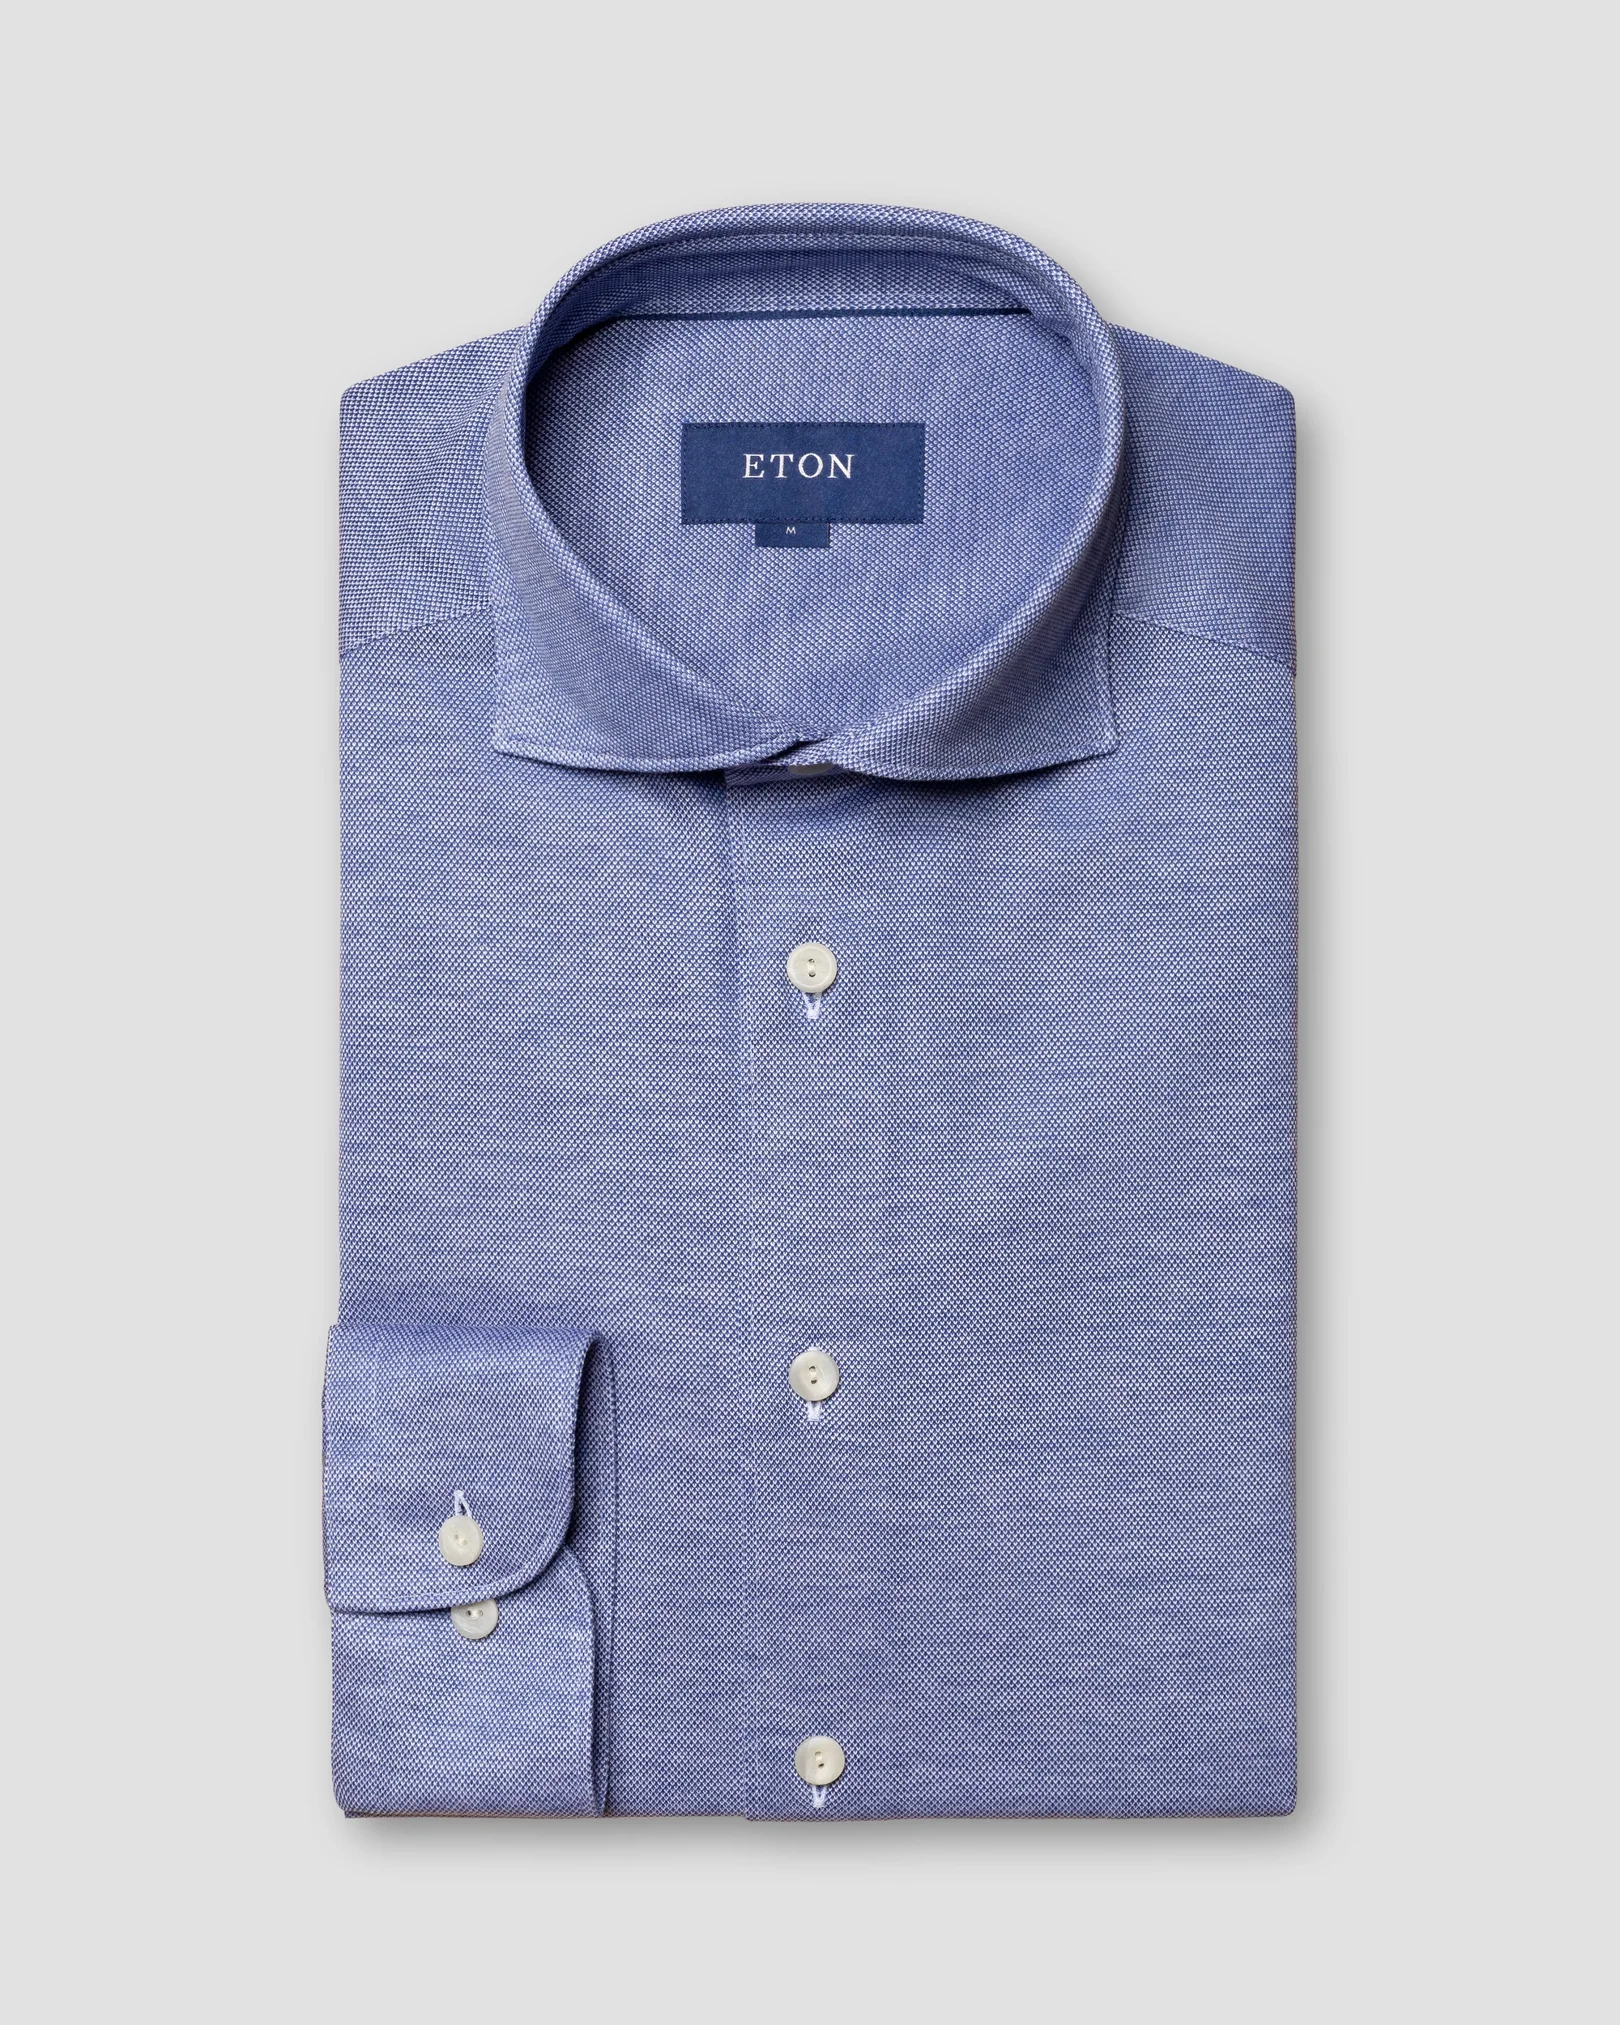 Eton - blue oxford pique shirt wide spread jersey single rounded slim jersey